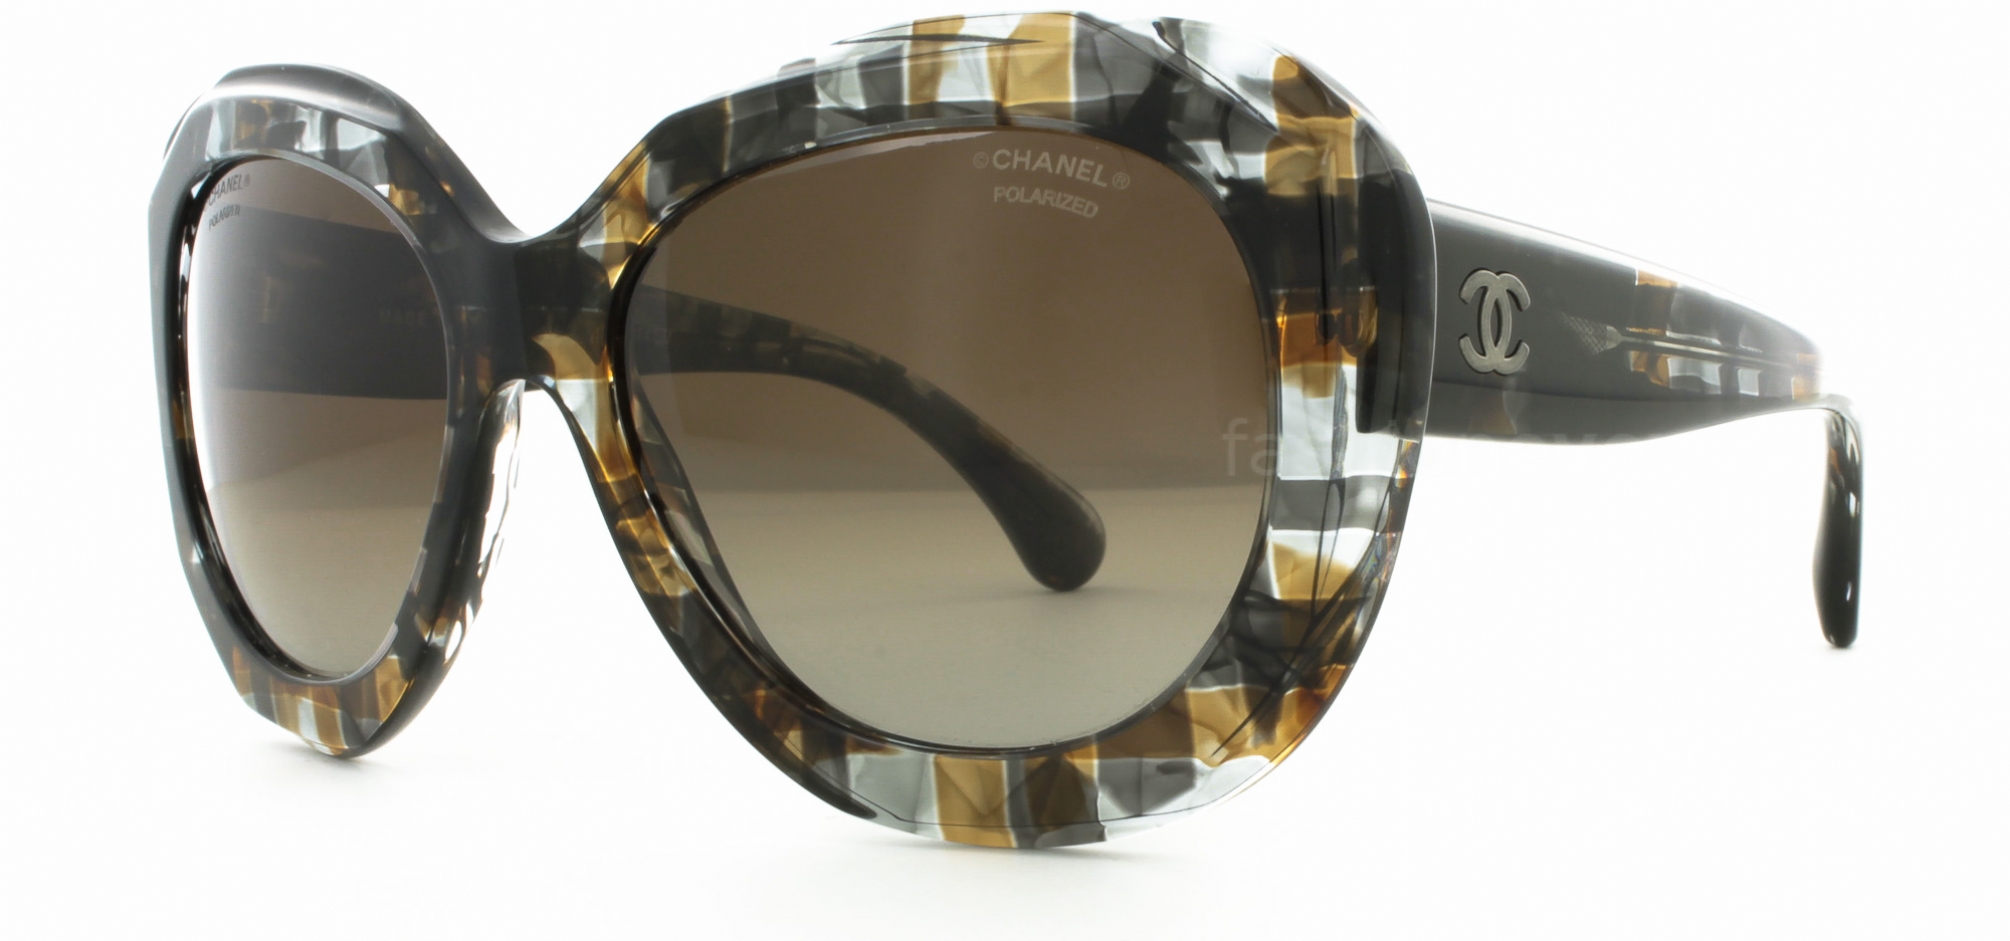 CHANEL 5323 1521S9